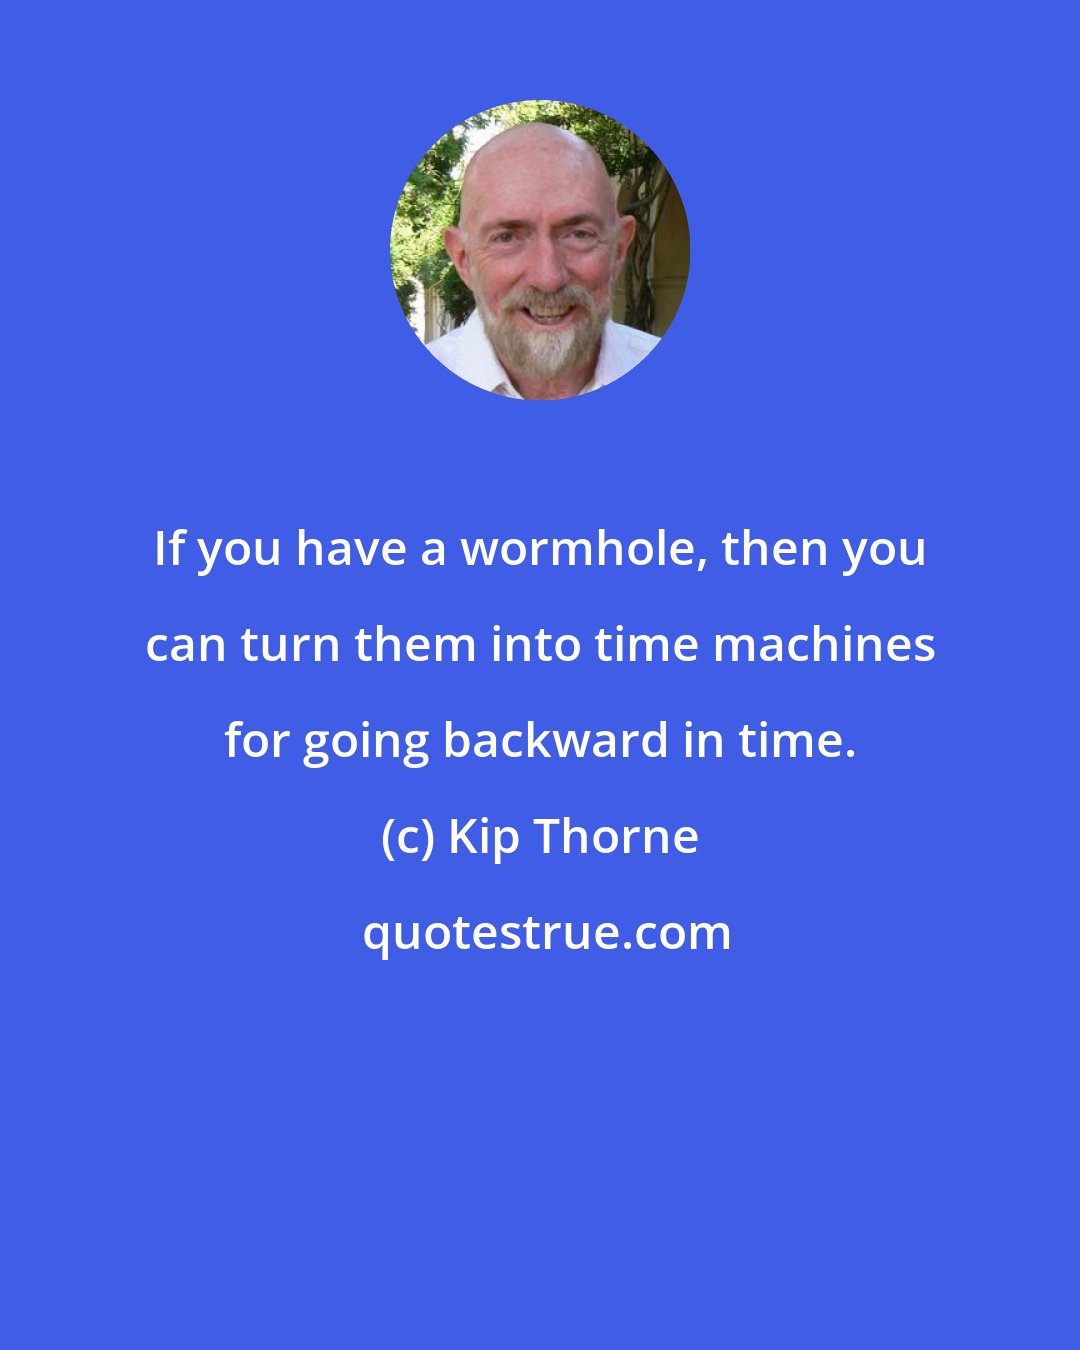 Kip Thorne: If you have a wormhole, then you can turn them into time machines for going backward in time.